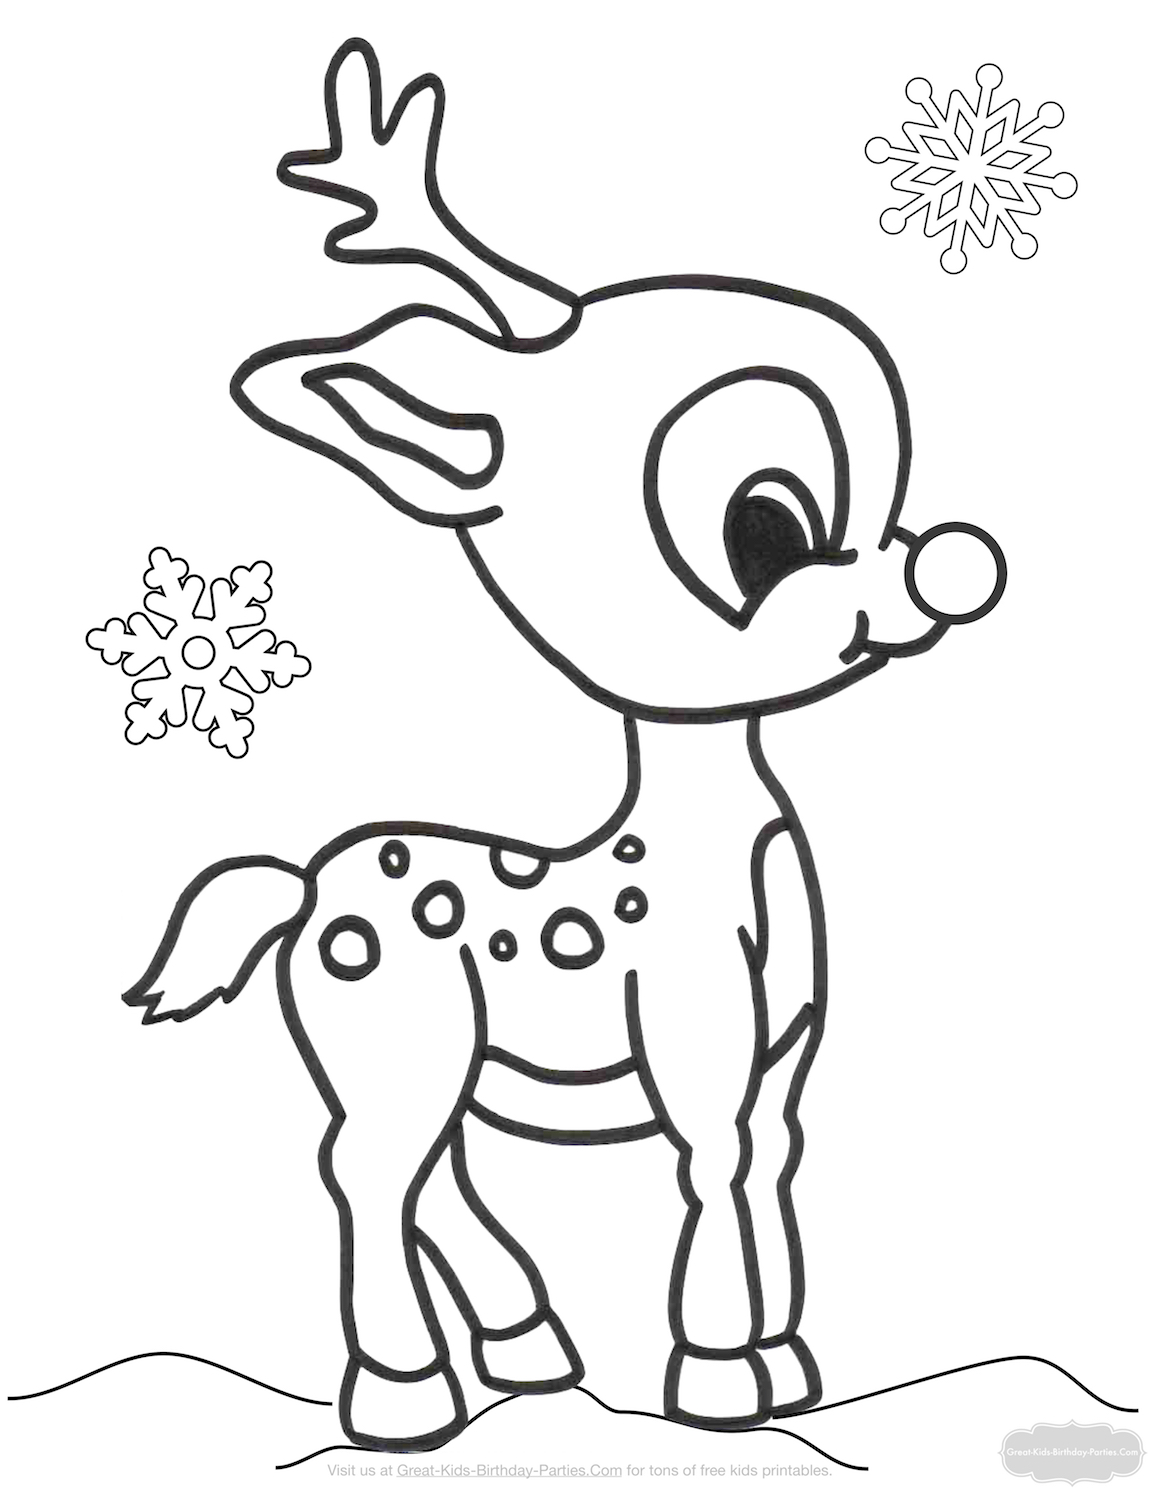 Christmas Coloring Pages Easy | Coloringnori - Coloring Pages for Kids